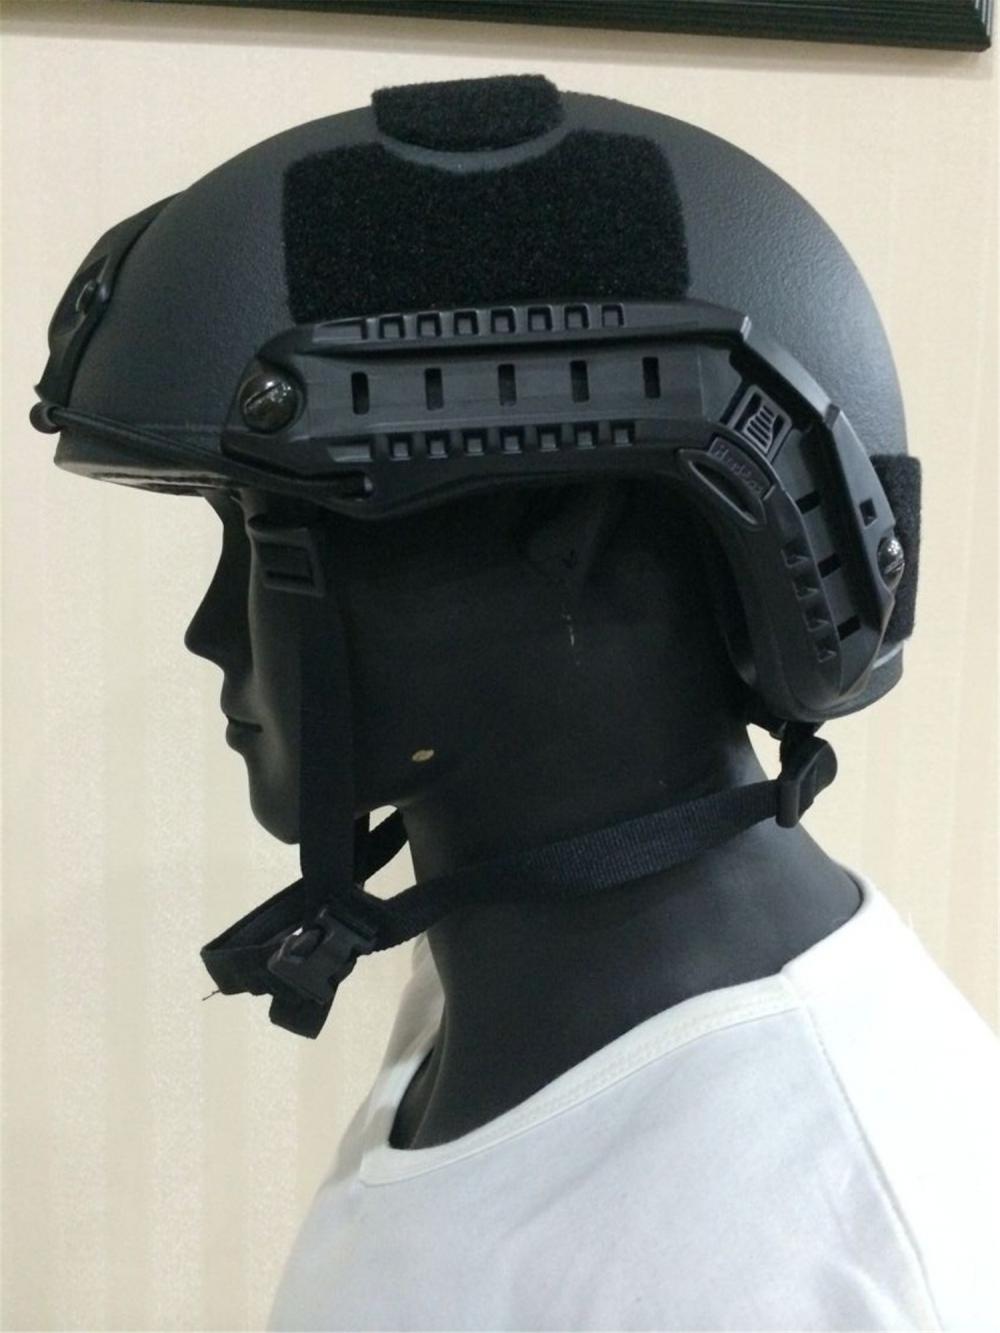 Casco FAST Military Bullet Proof